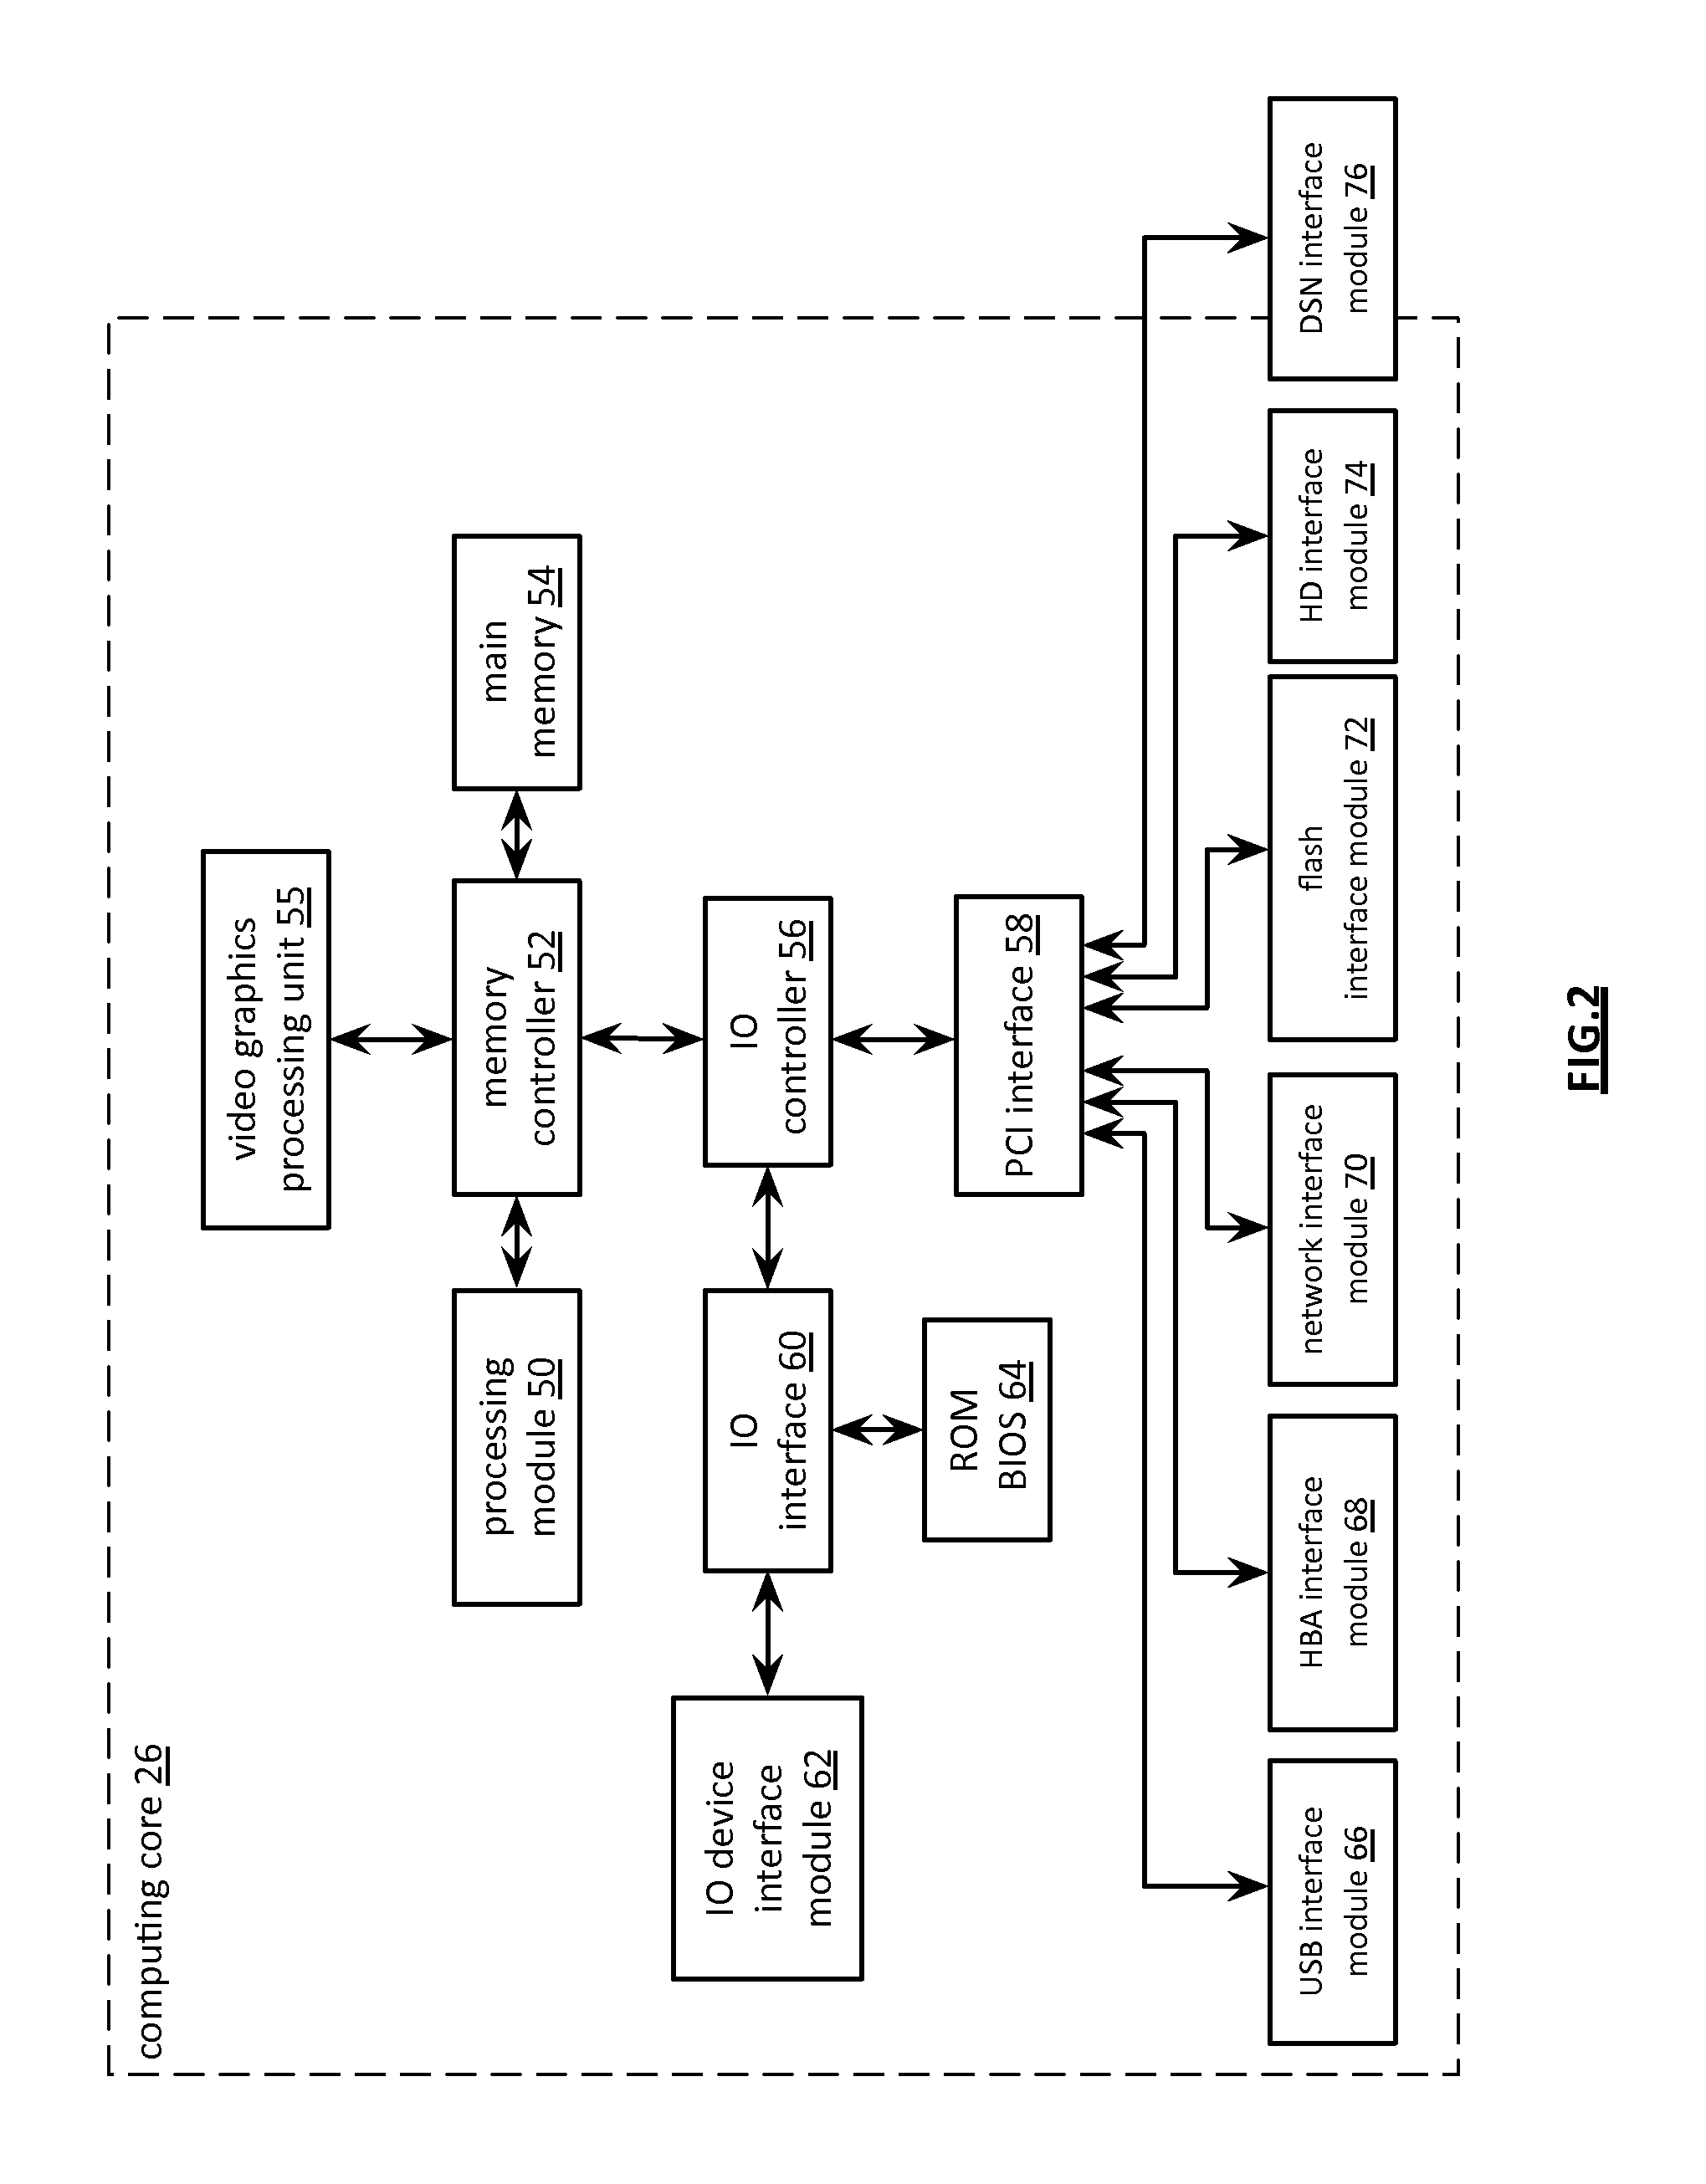 Migrating an encoded data slice based on an end-of-life memory level of a memory device